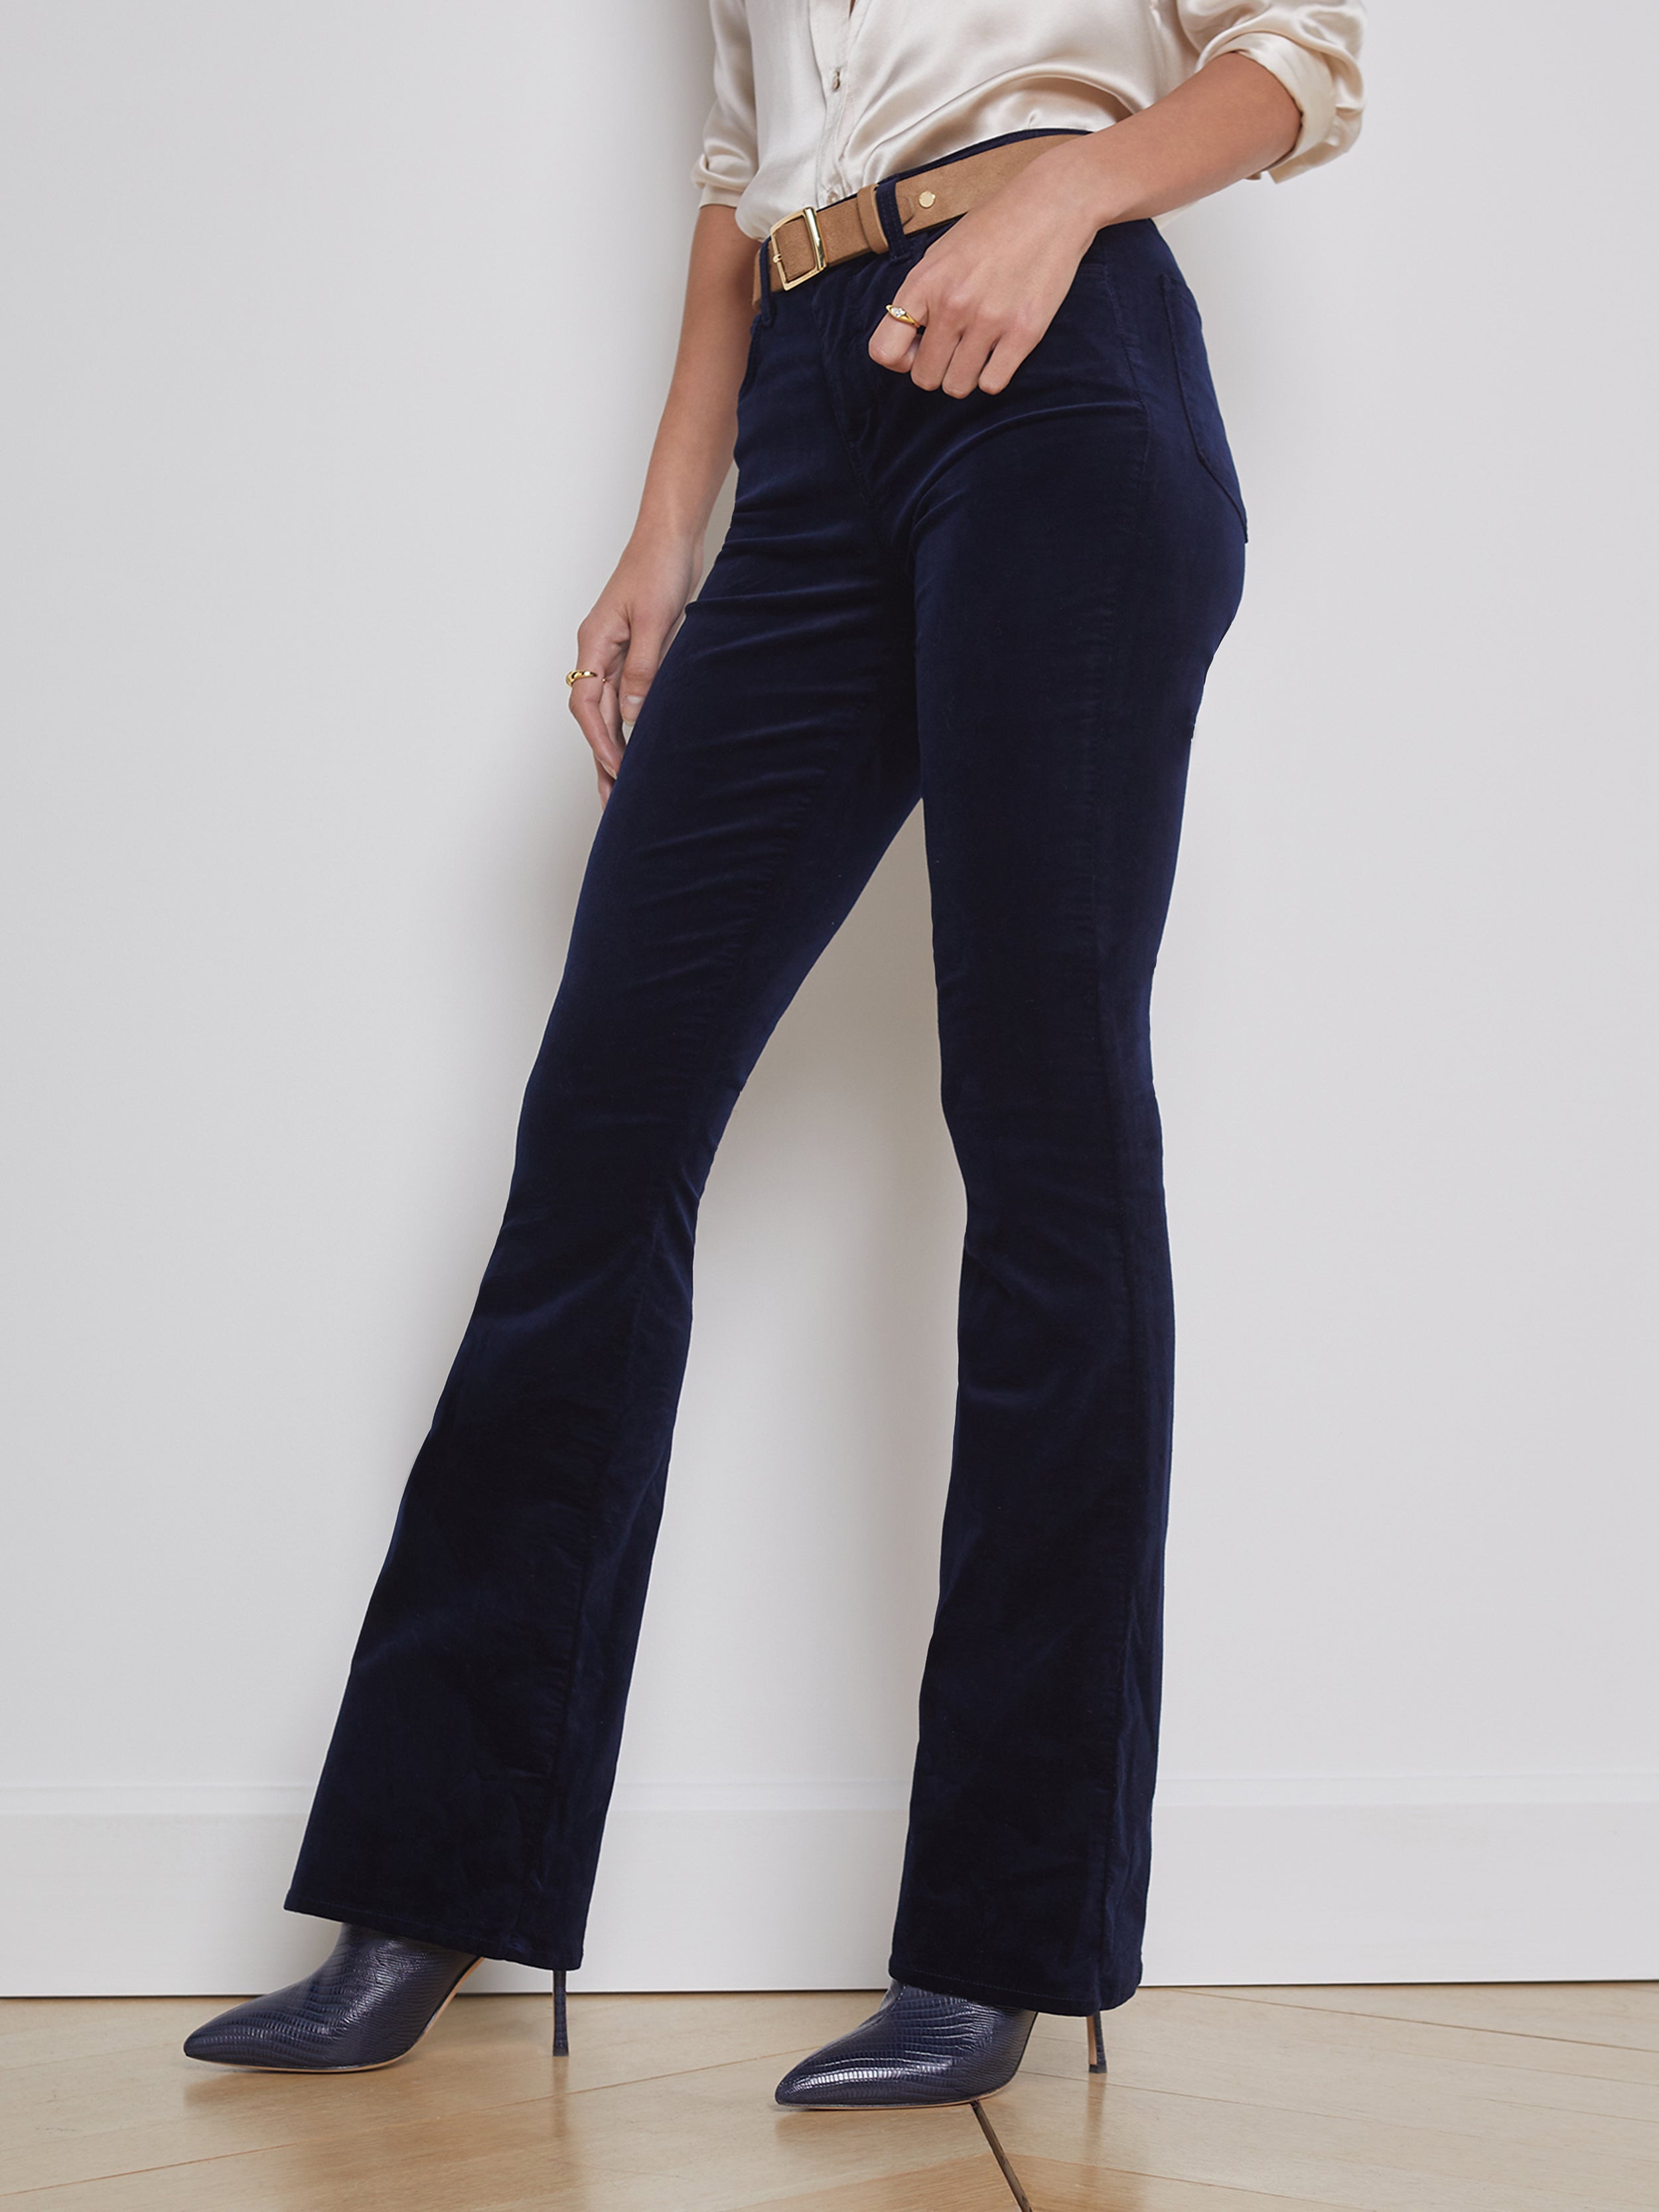 L'AGENCE - Women's Pants | Trousers, Cargos & Relaxed Fits